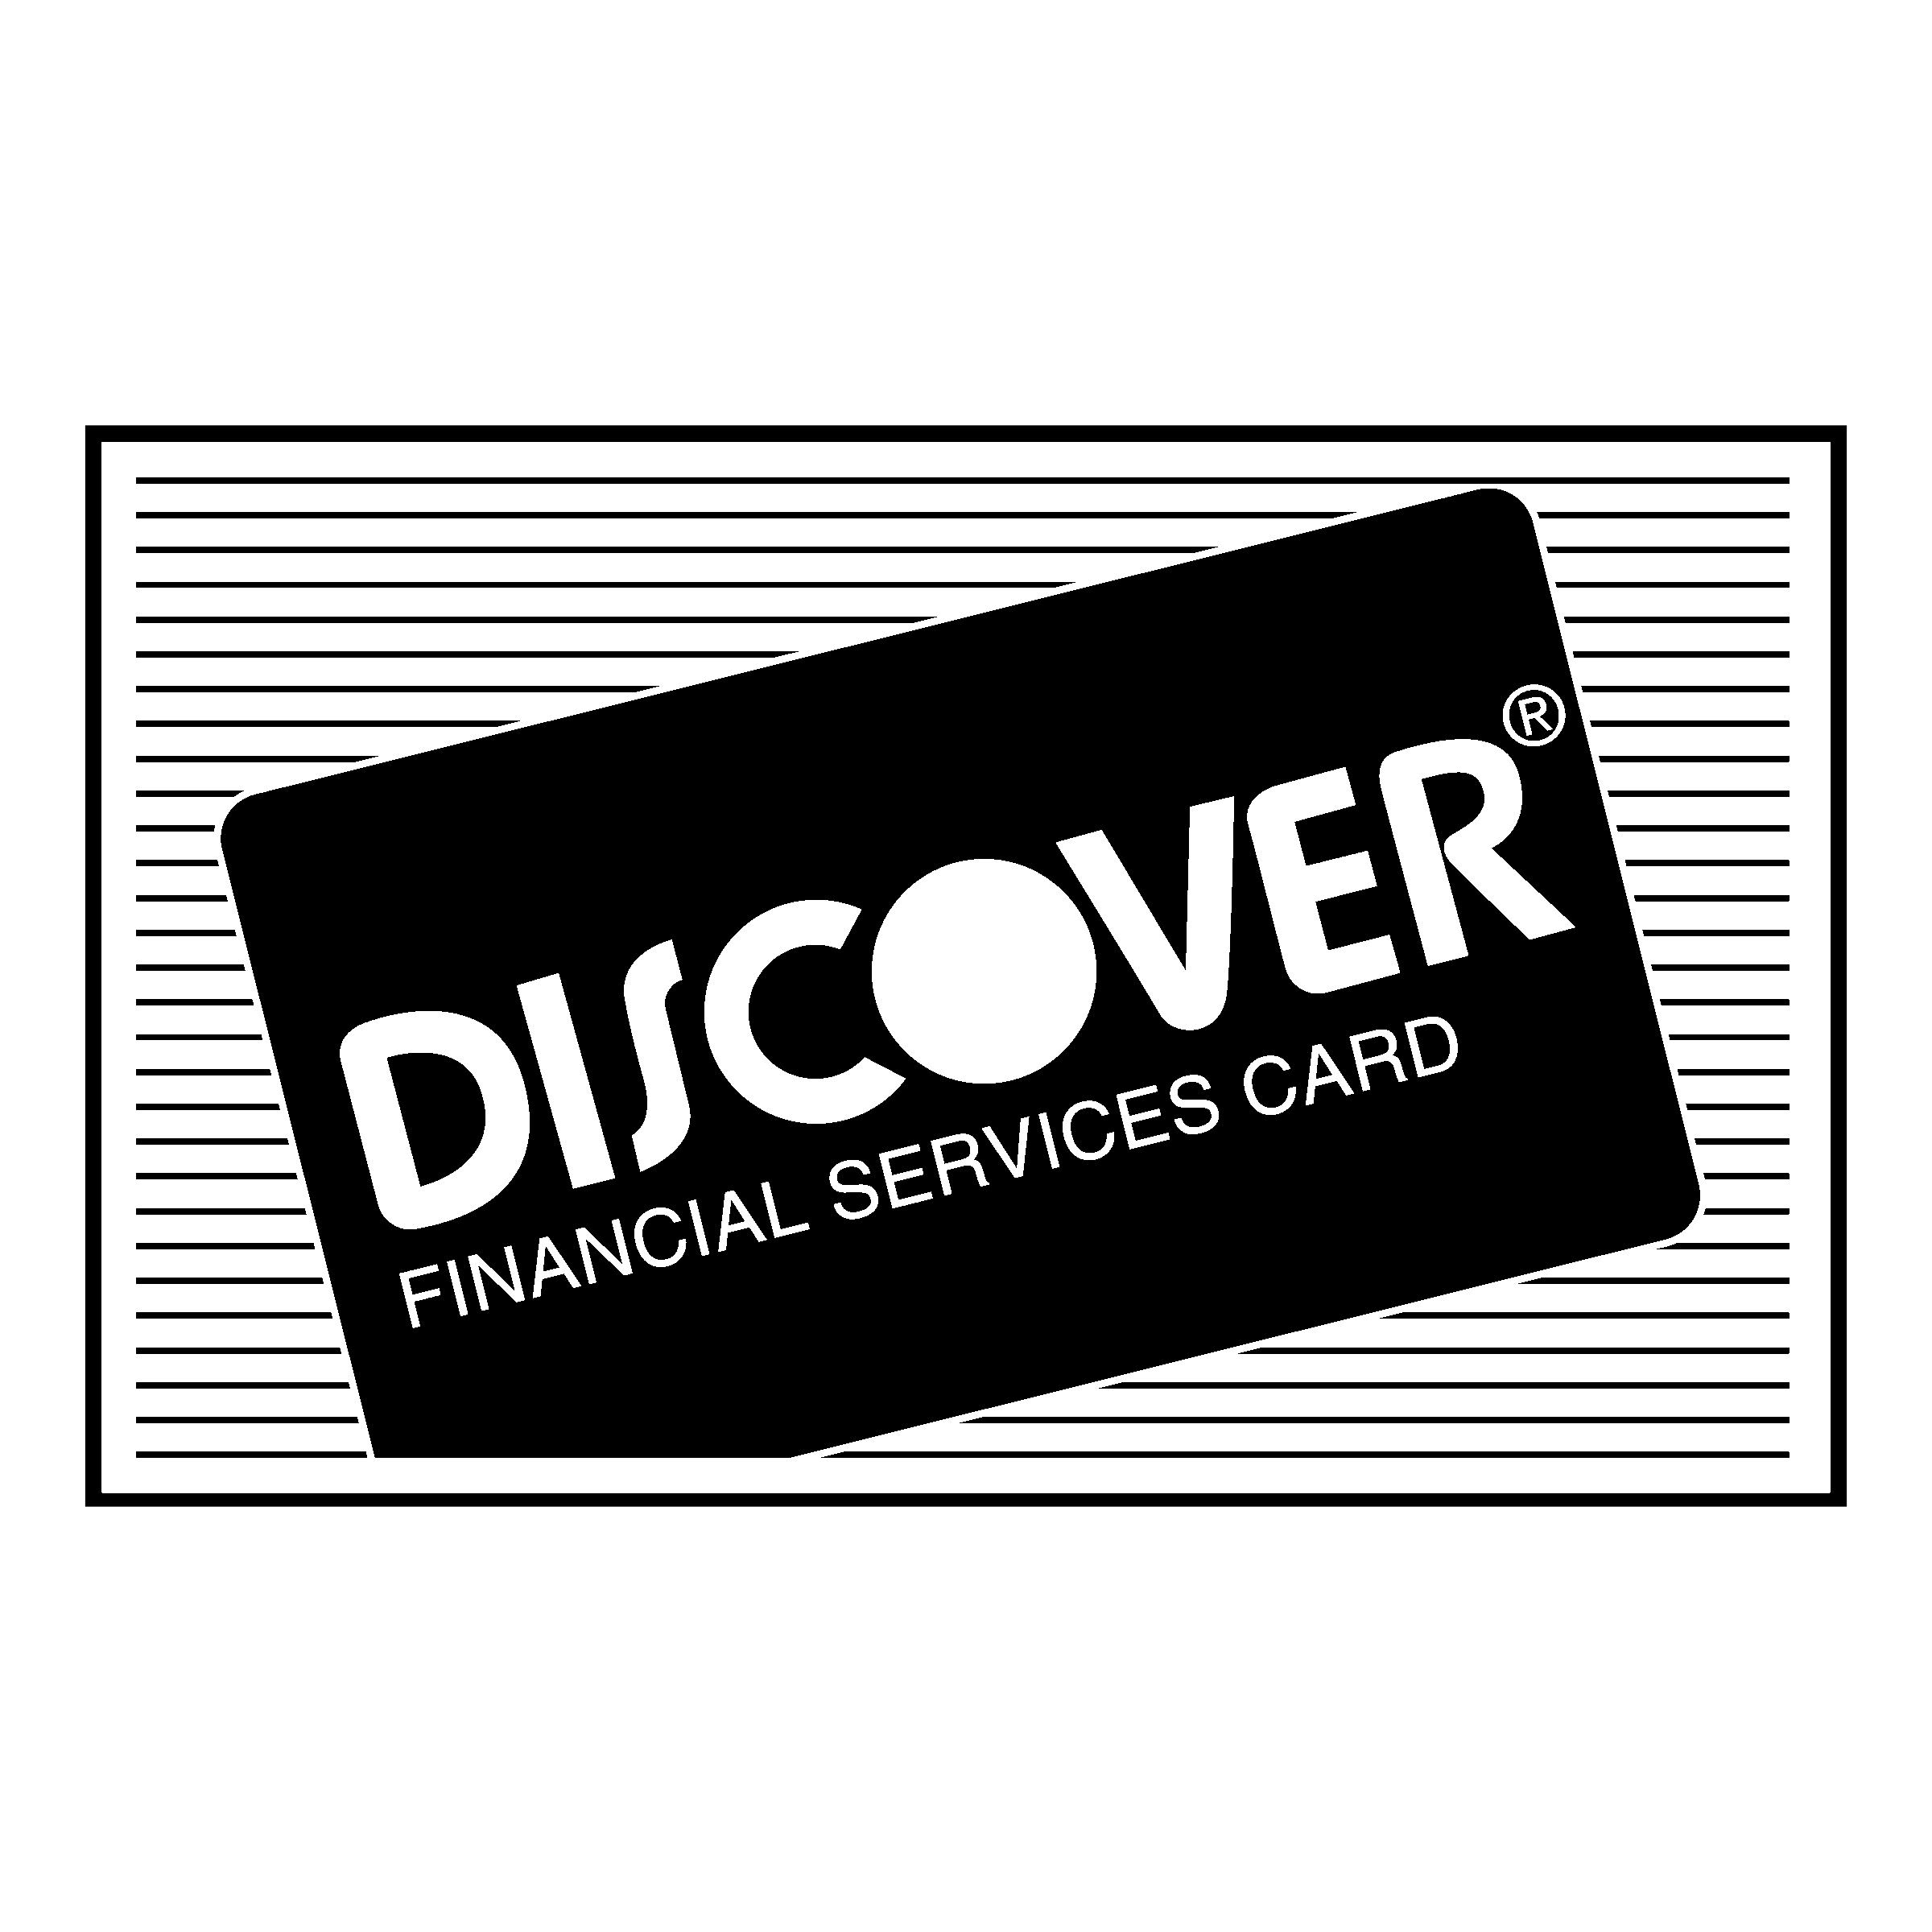 Discover Logo PNG Images